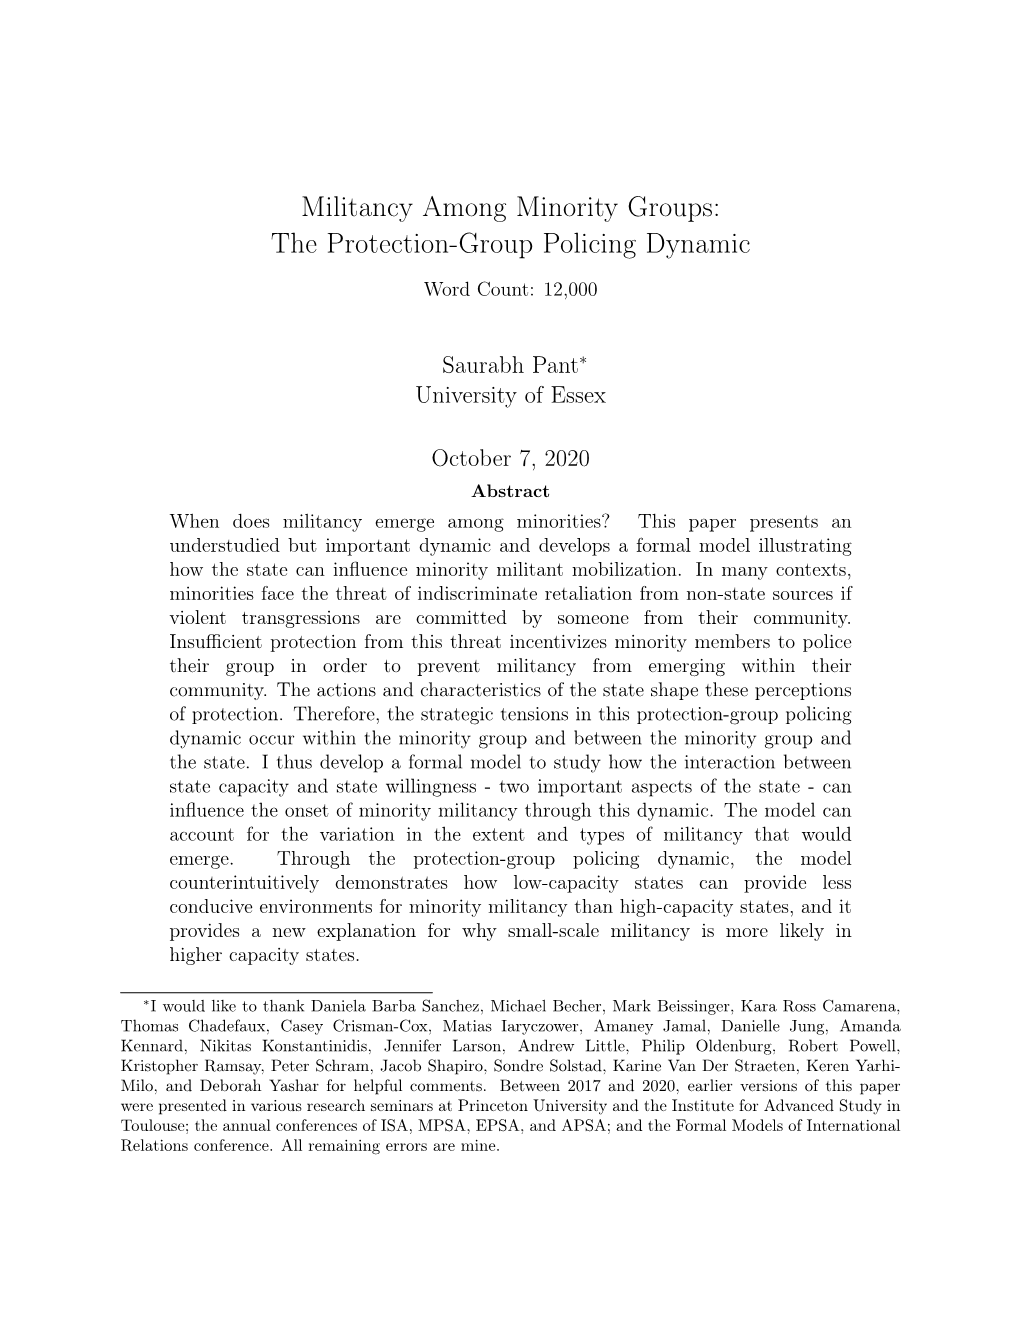 Militancy Among Minority Groups: the Protection-Group Policing Dynamic